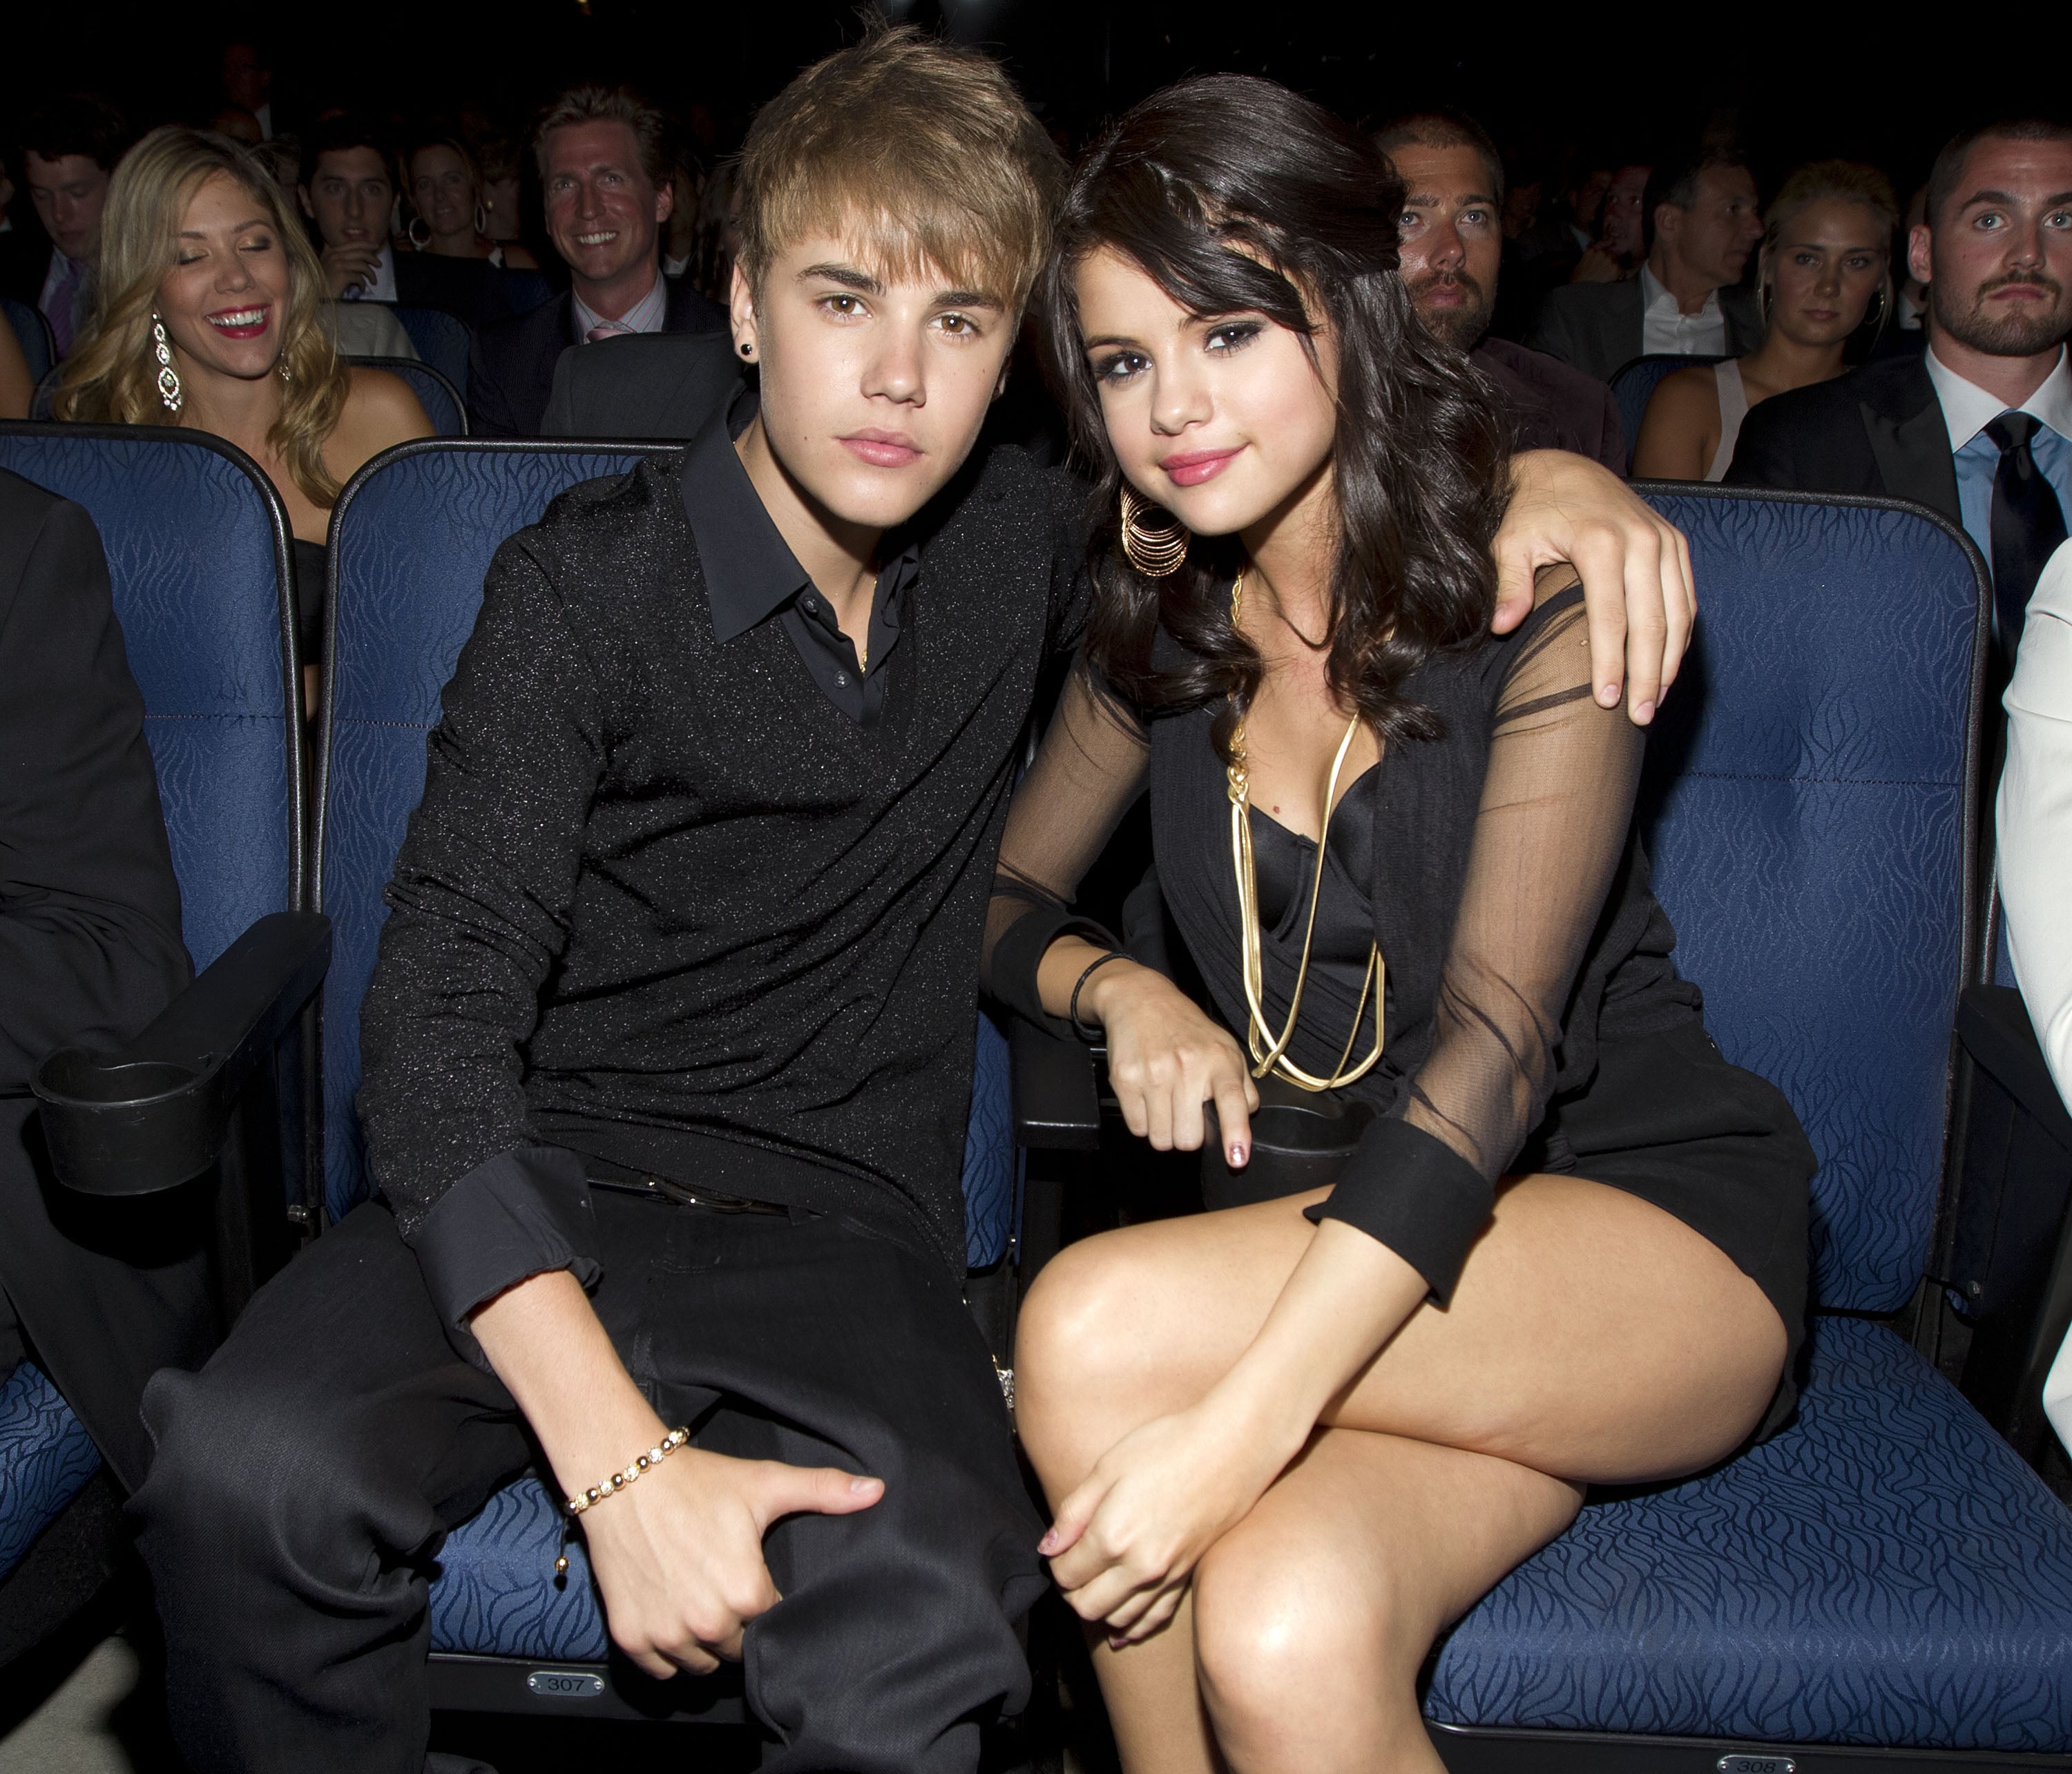 I don't know if I'm over it yet': When Justin Bieber expressed meeting  Selena Gomez 5 years after break up